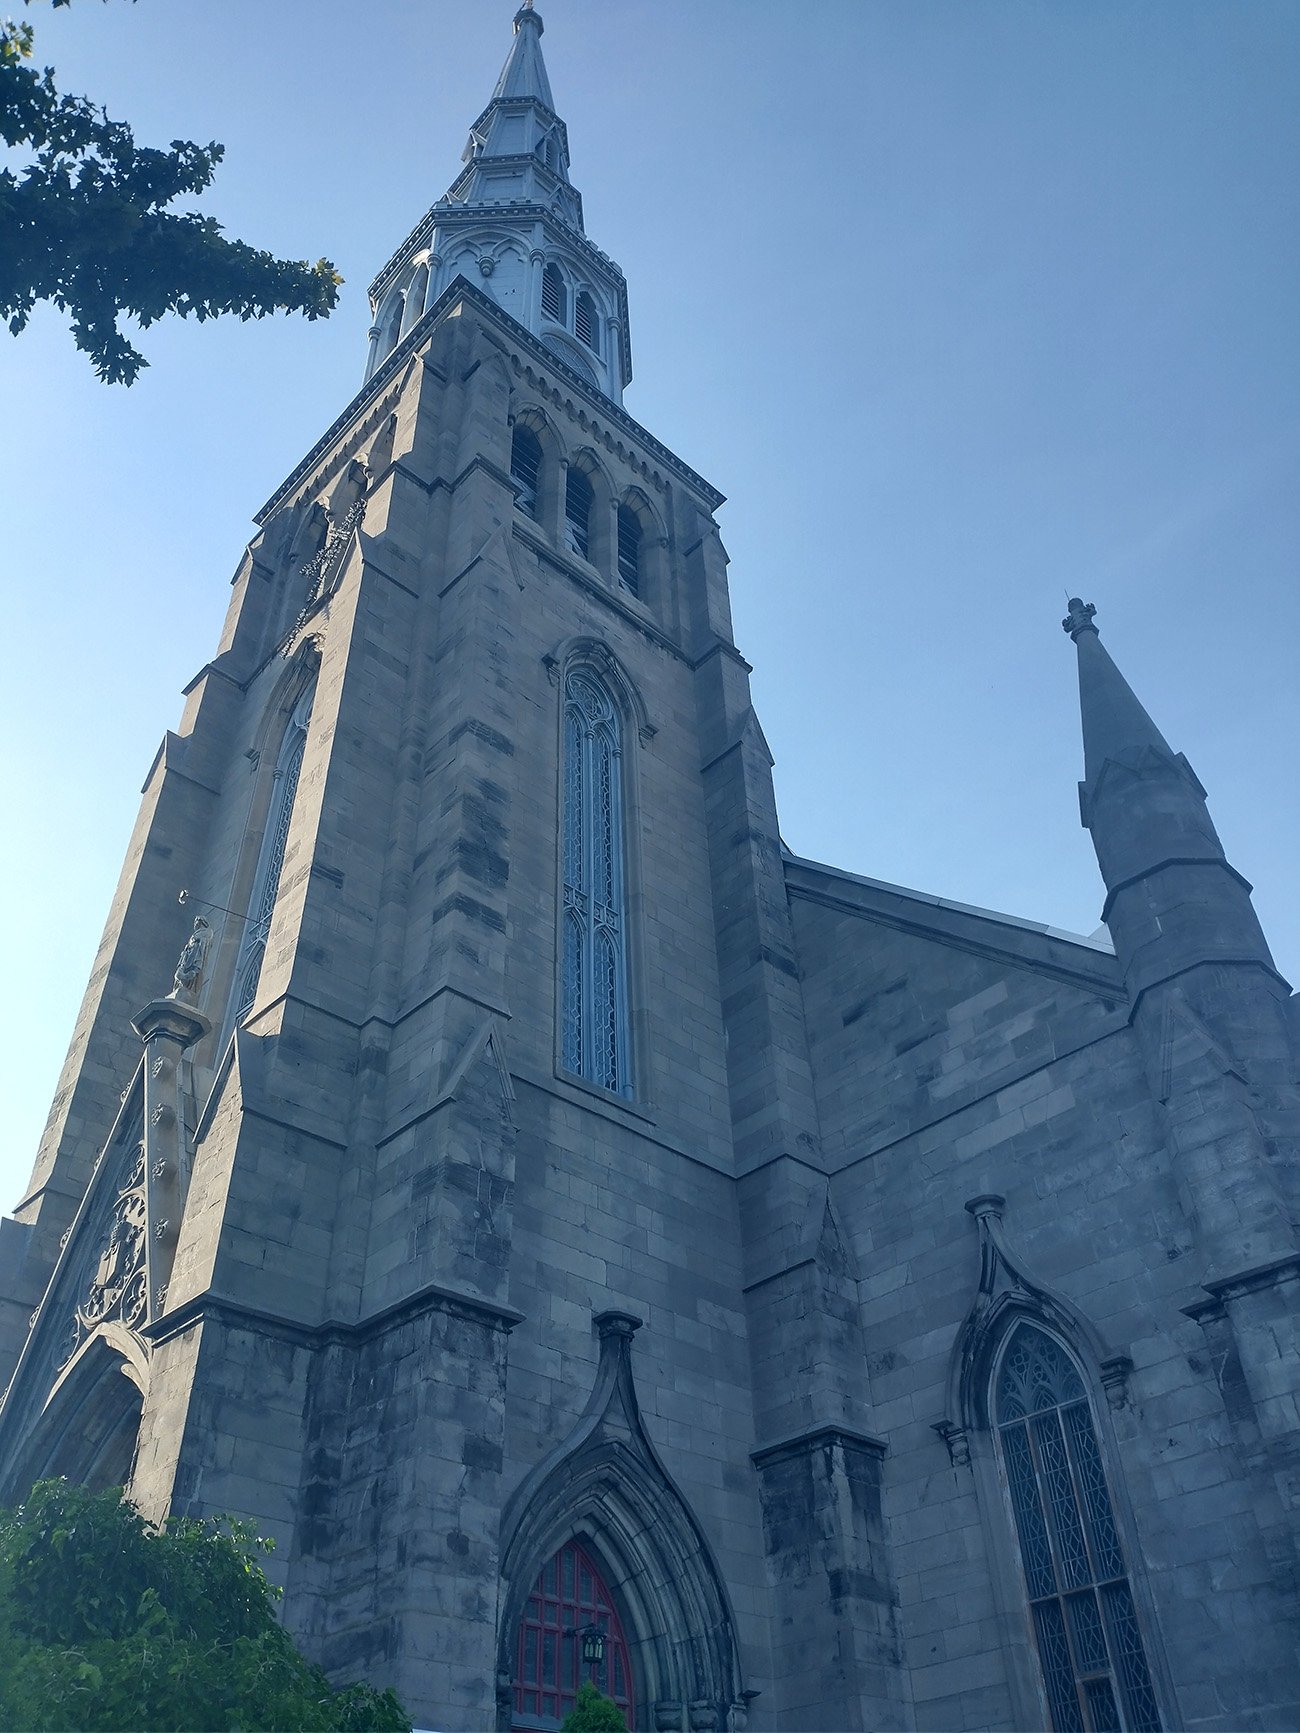 Quebec has a LOT of churches. Almost every town has one.